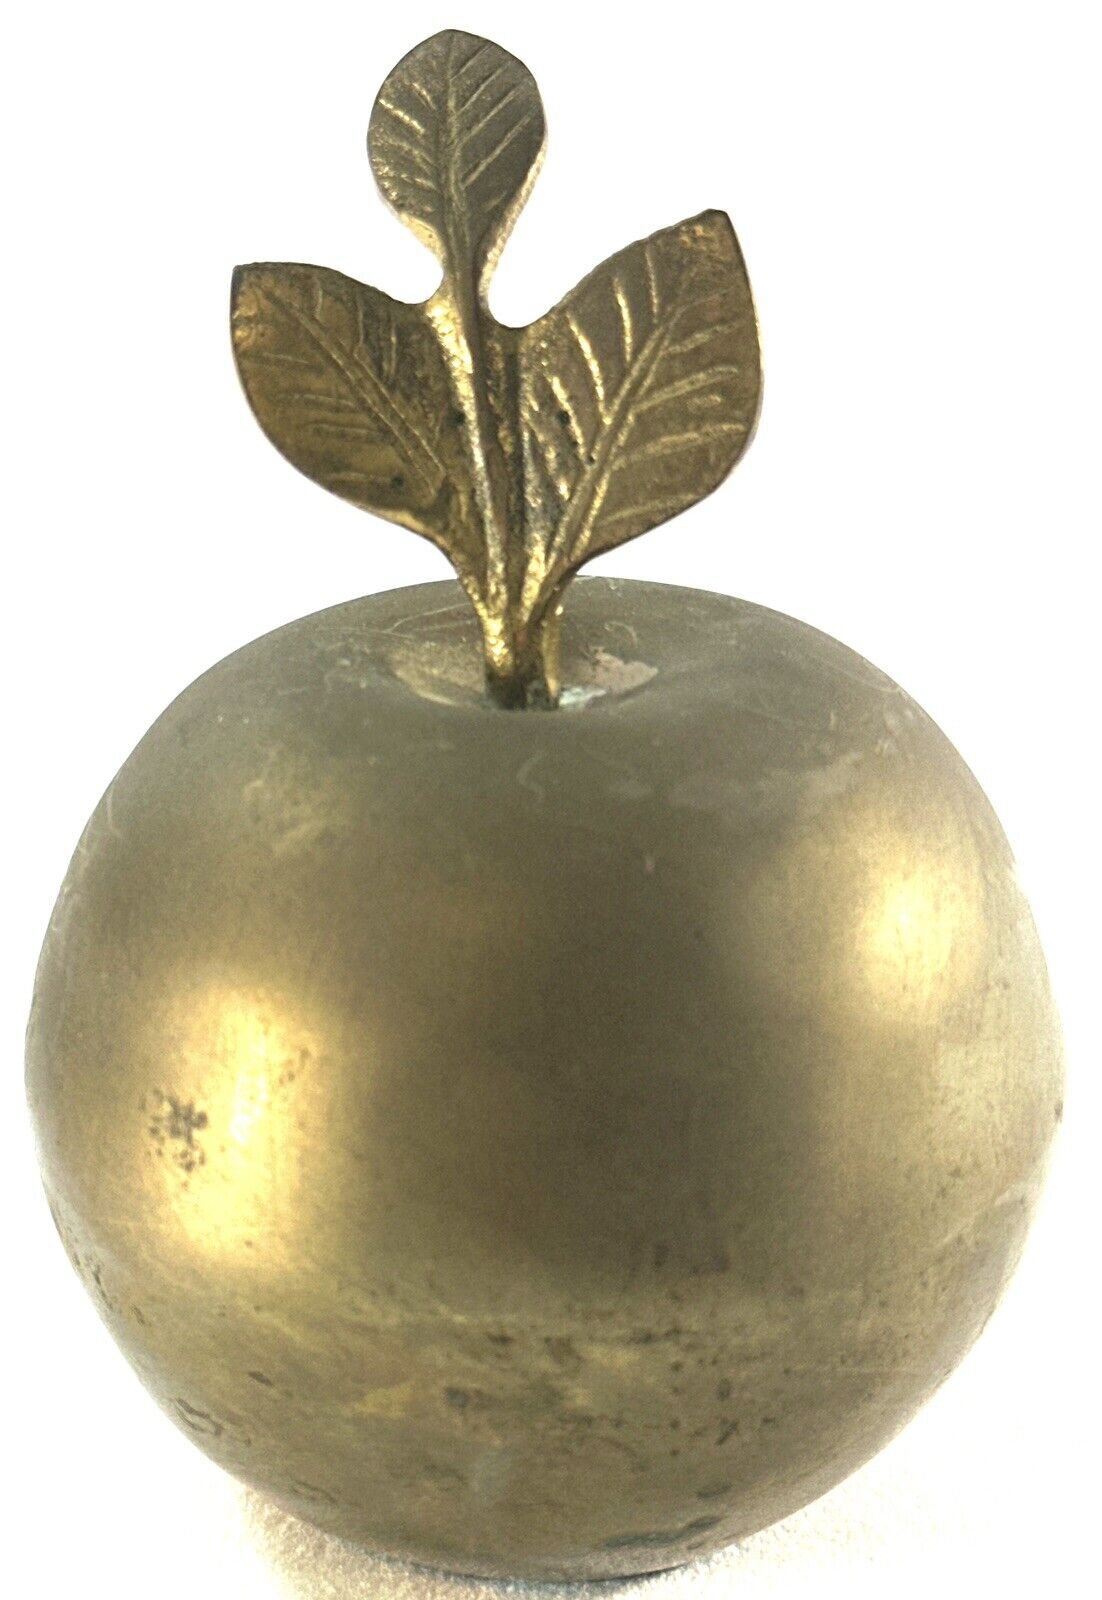 Vintage Heavy Brass Apple Paperweight 5” Three Leaves